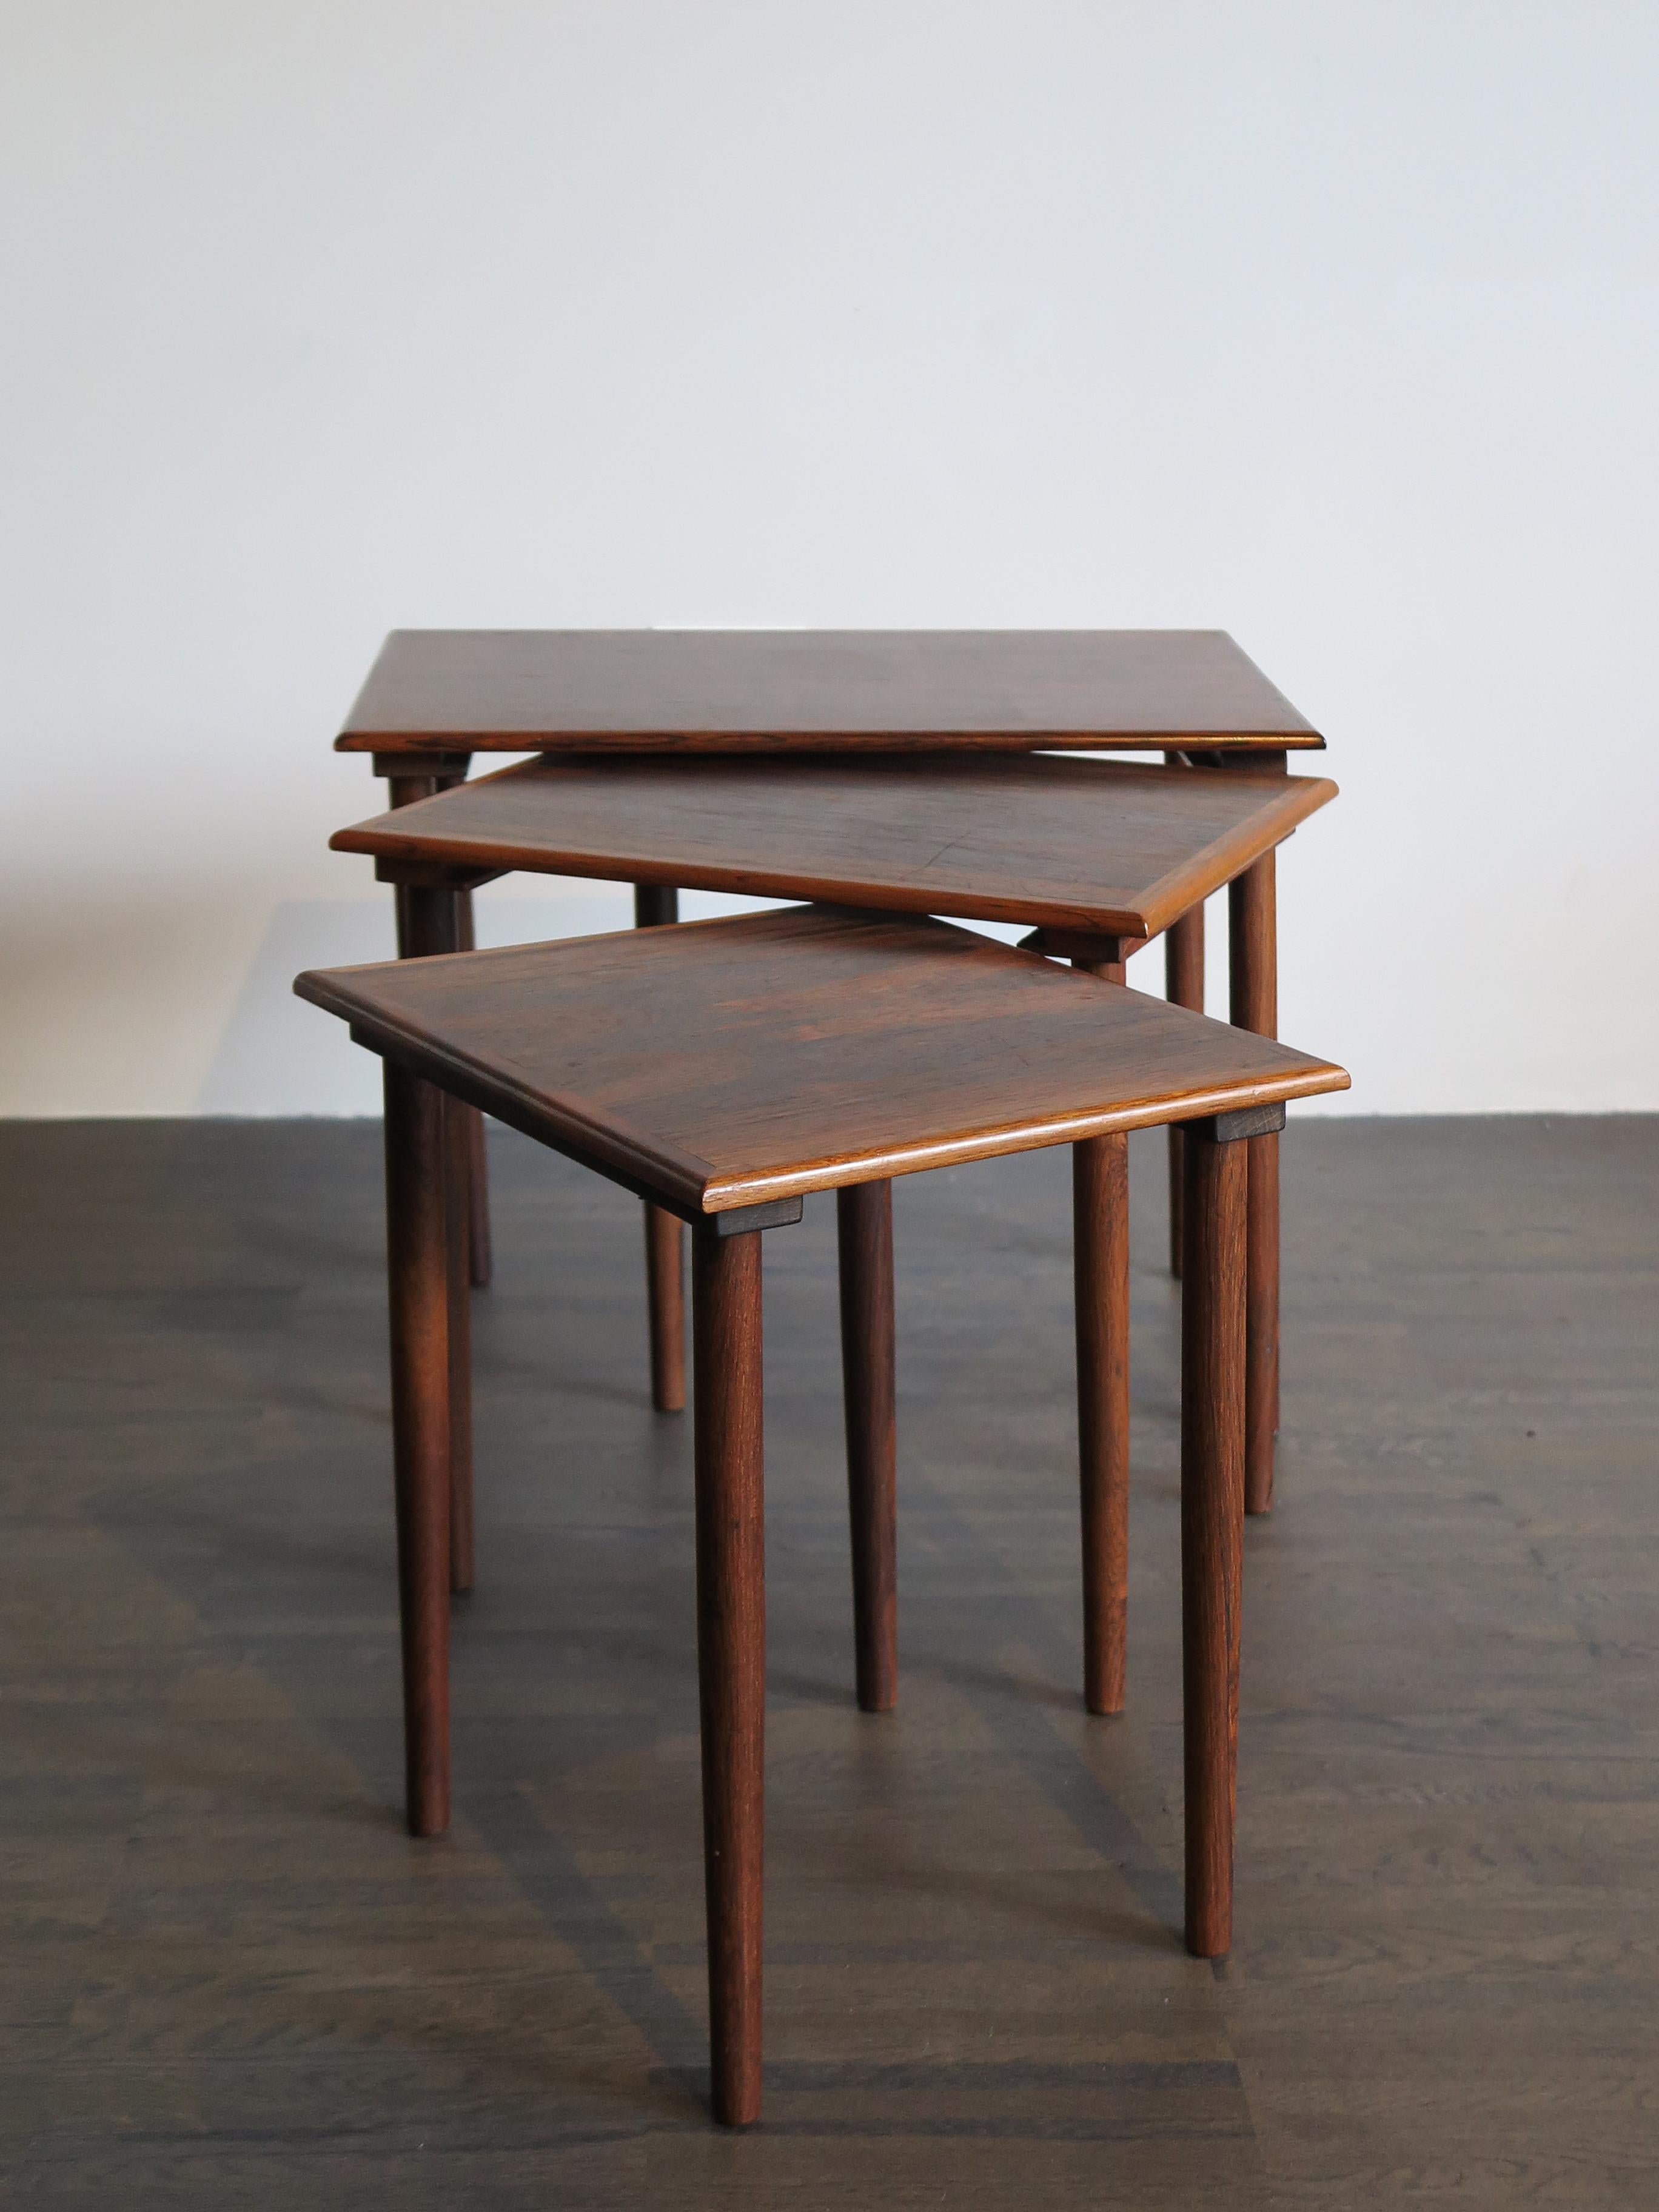 Danish dark wood nesting tables set, circa 1950s,
please note that the set is original of the period and thus shows normal signs of age and use.